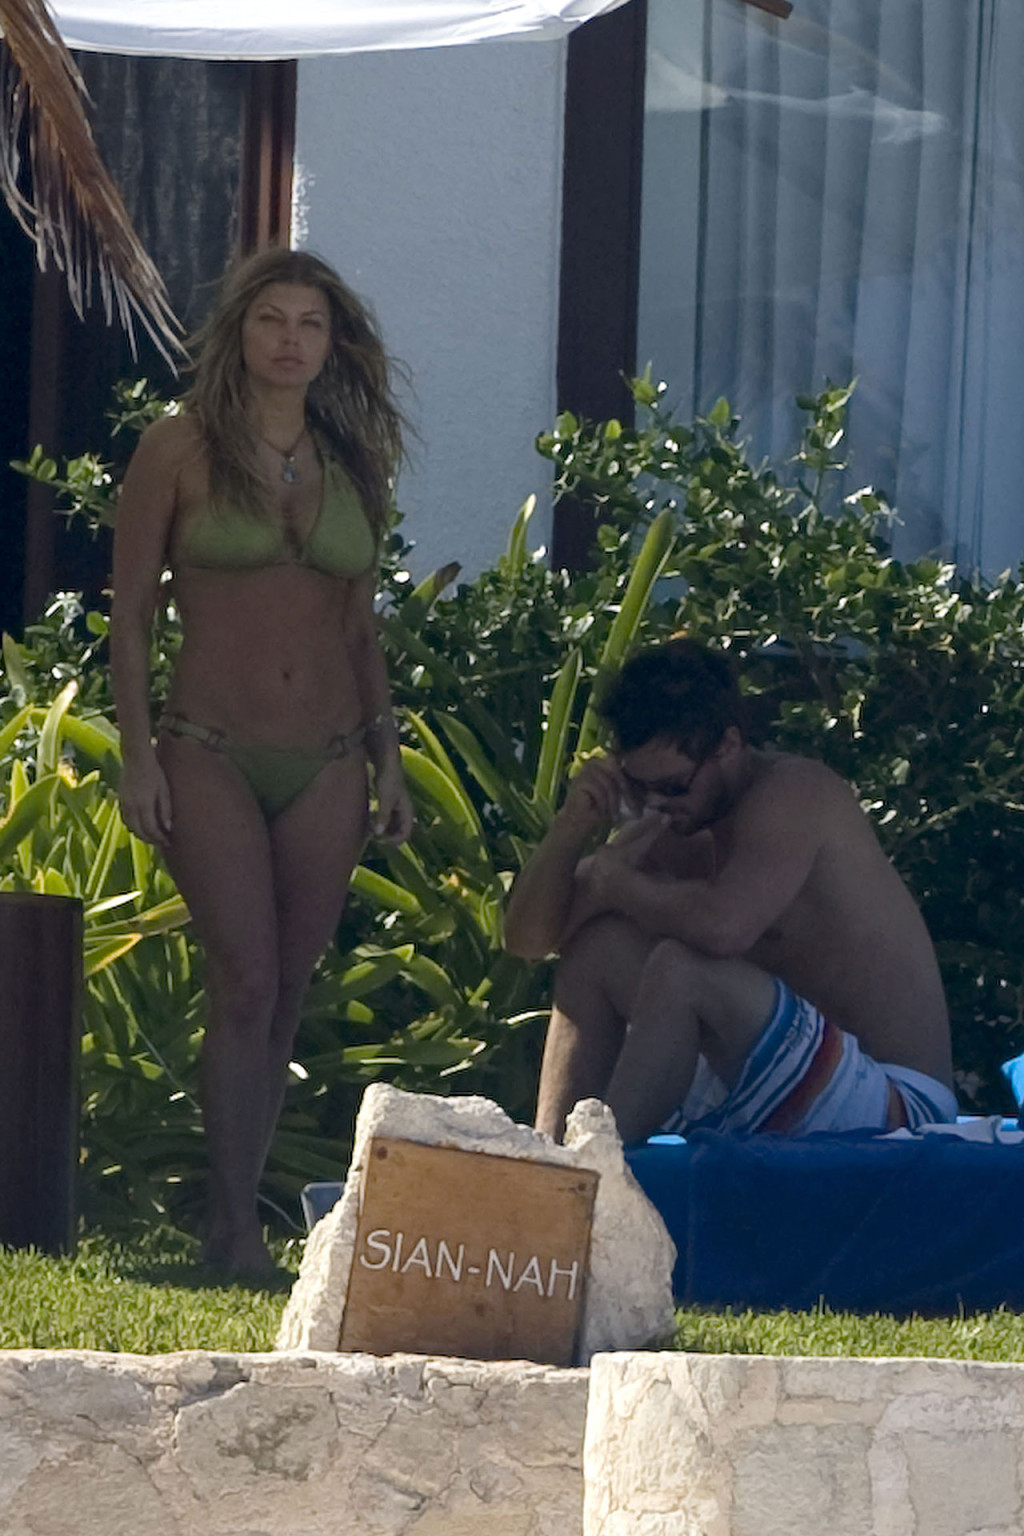 Fergie showing her fantastic ass and body in bikini on beach #75373112